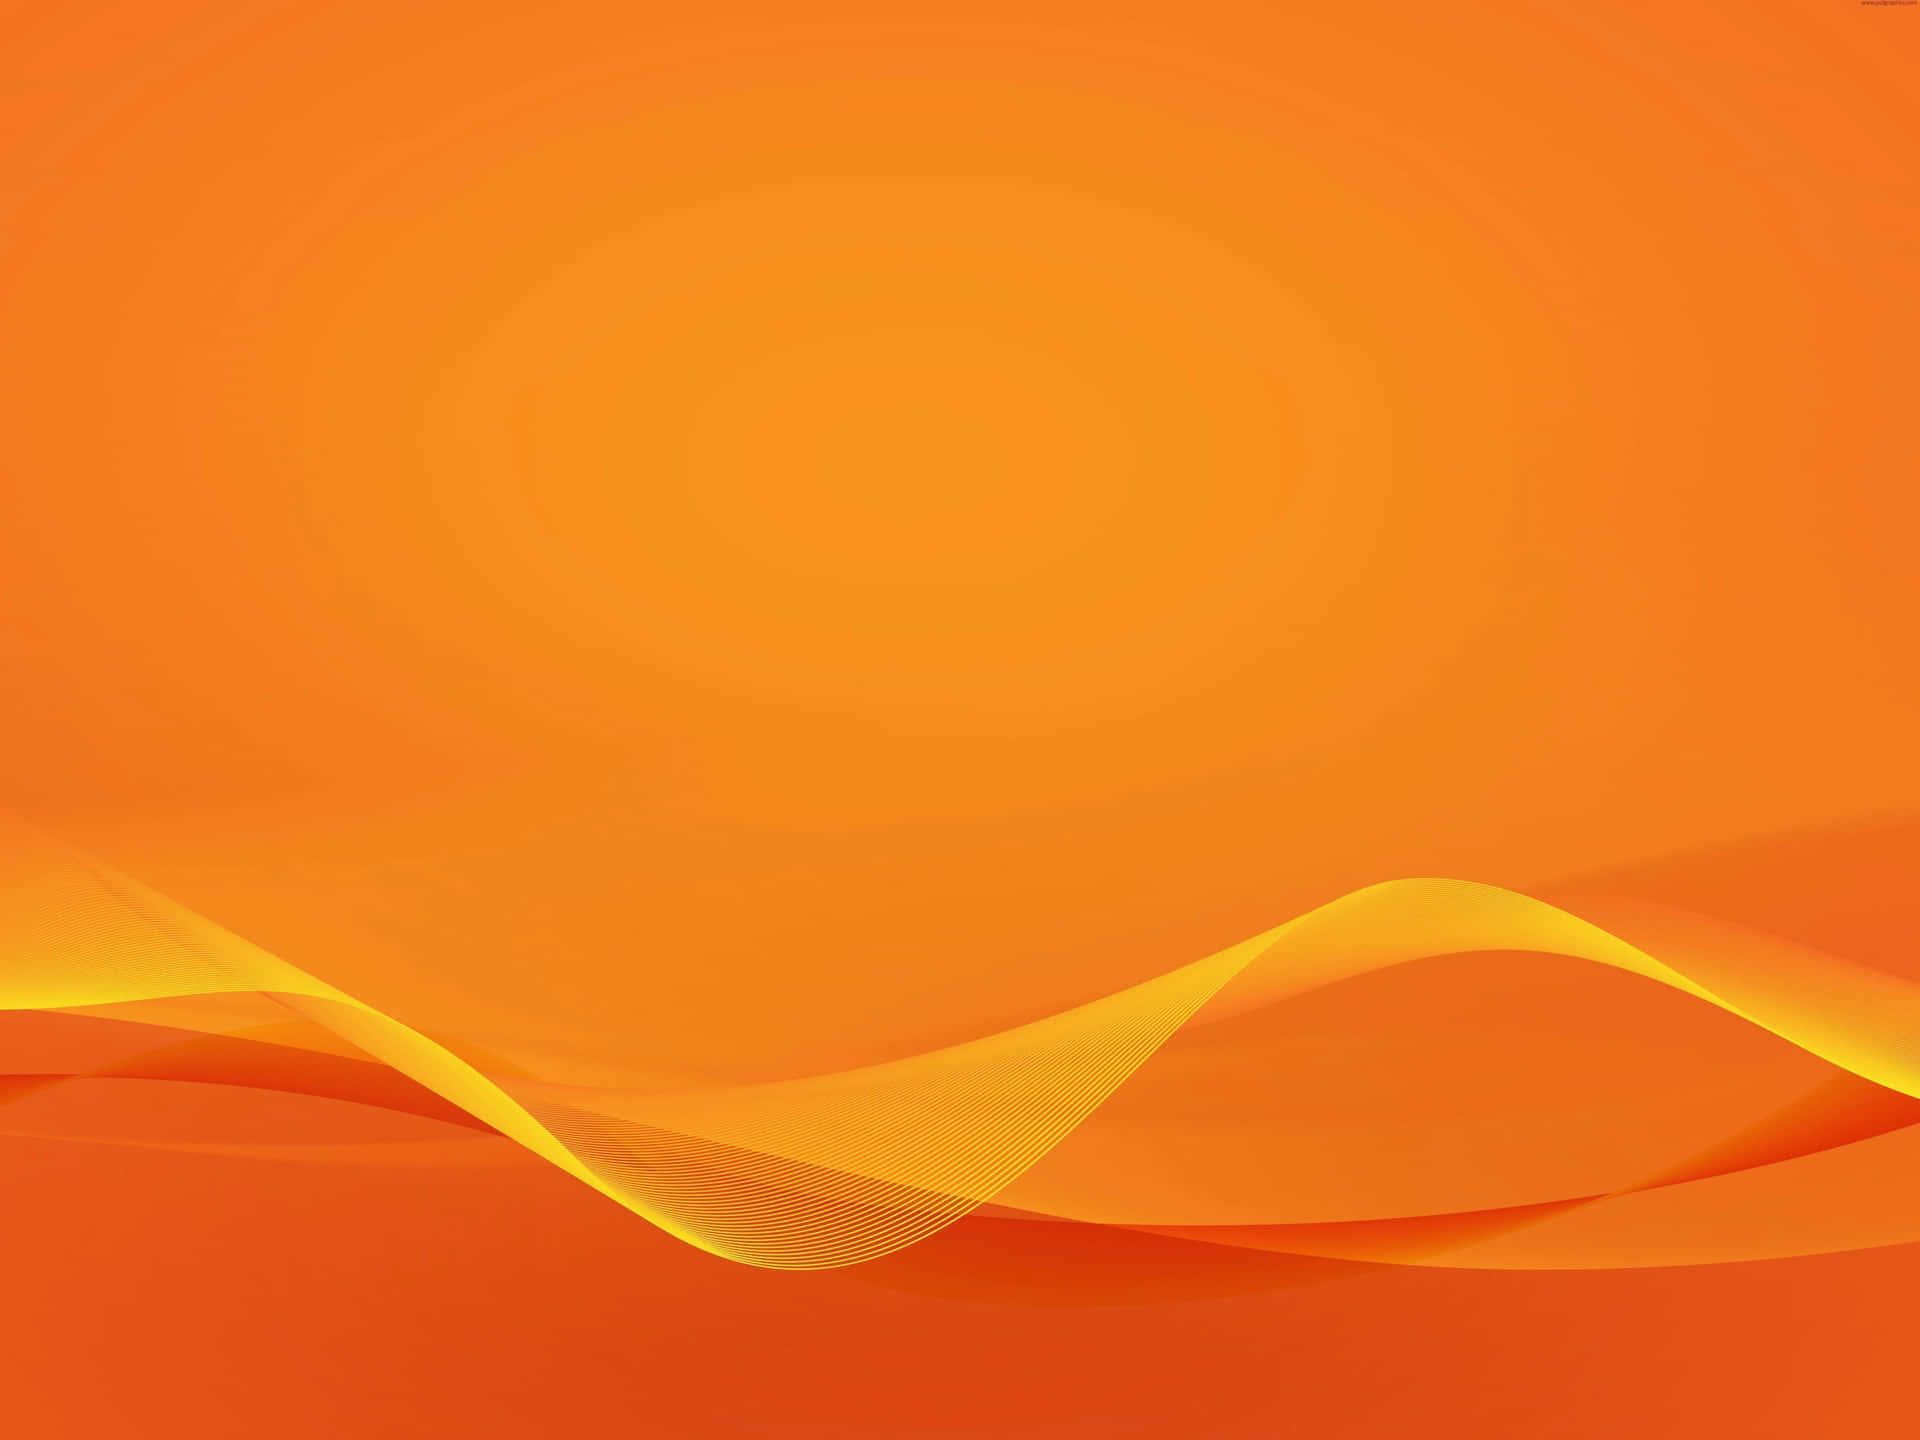 An Orange Background With A Wave Pattern